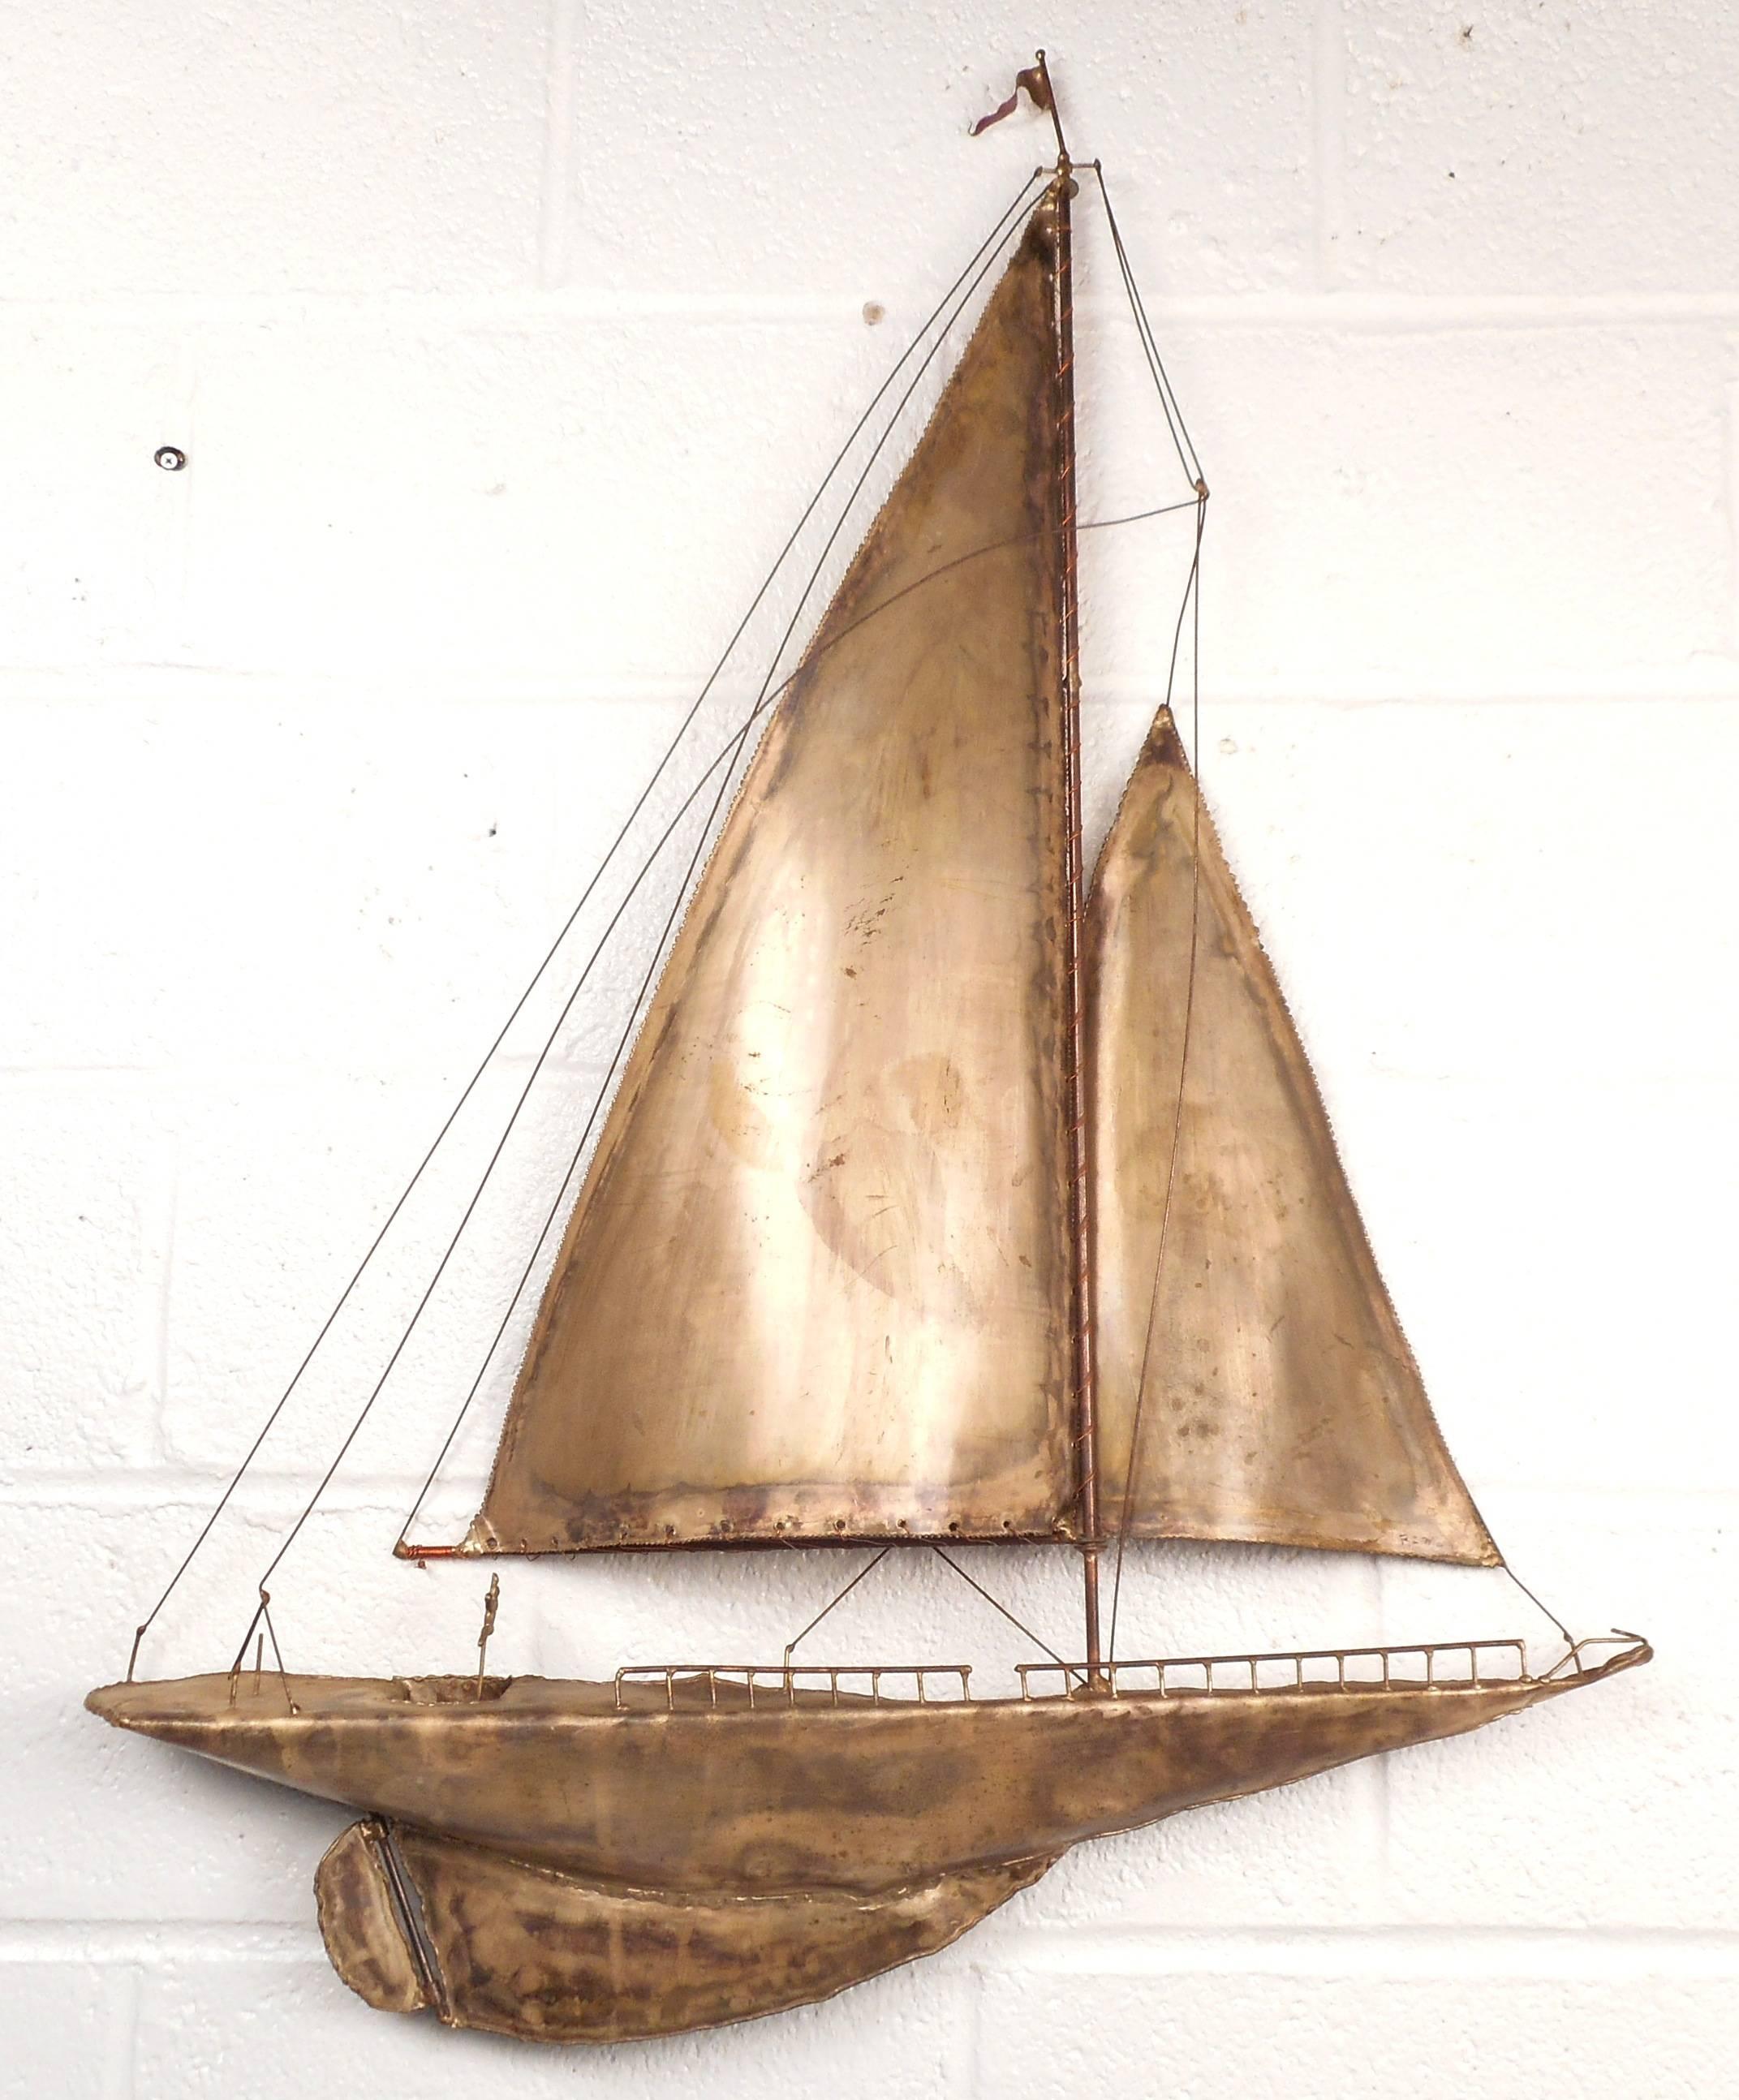 Stunning Mid-Century Modern metal sailboat wall art features intricate detailing from the mast to the keel. The unique design displays a miniature steering wheel, railing, rudder, and flag all patiently crafted by the designer. Perfect addition to